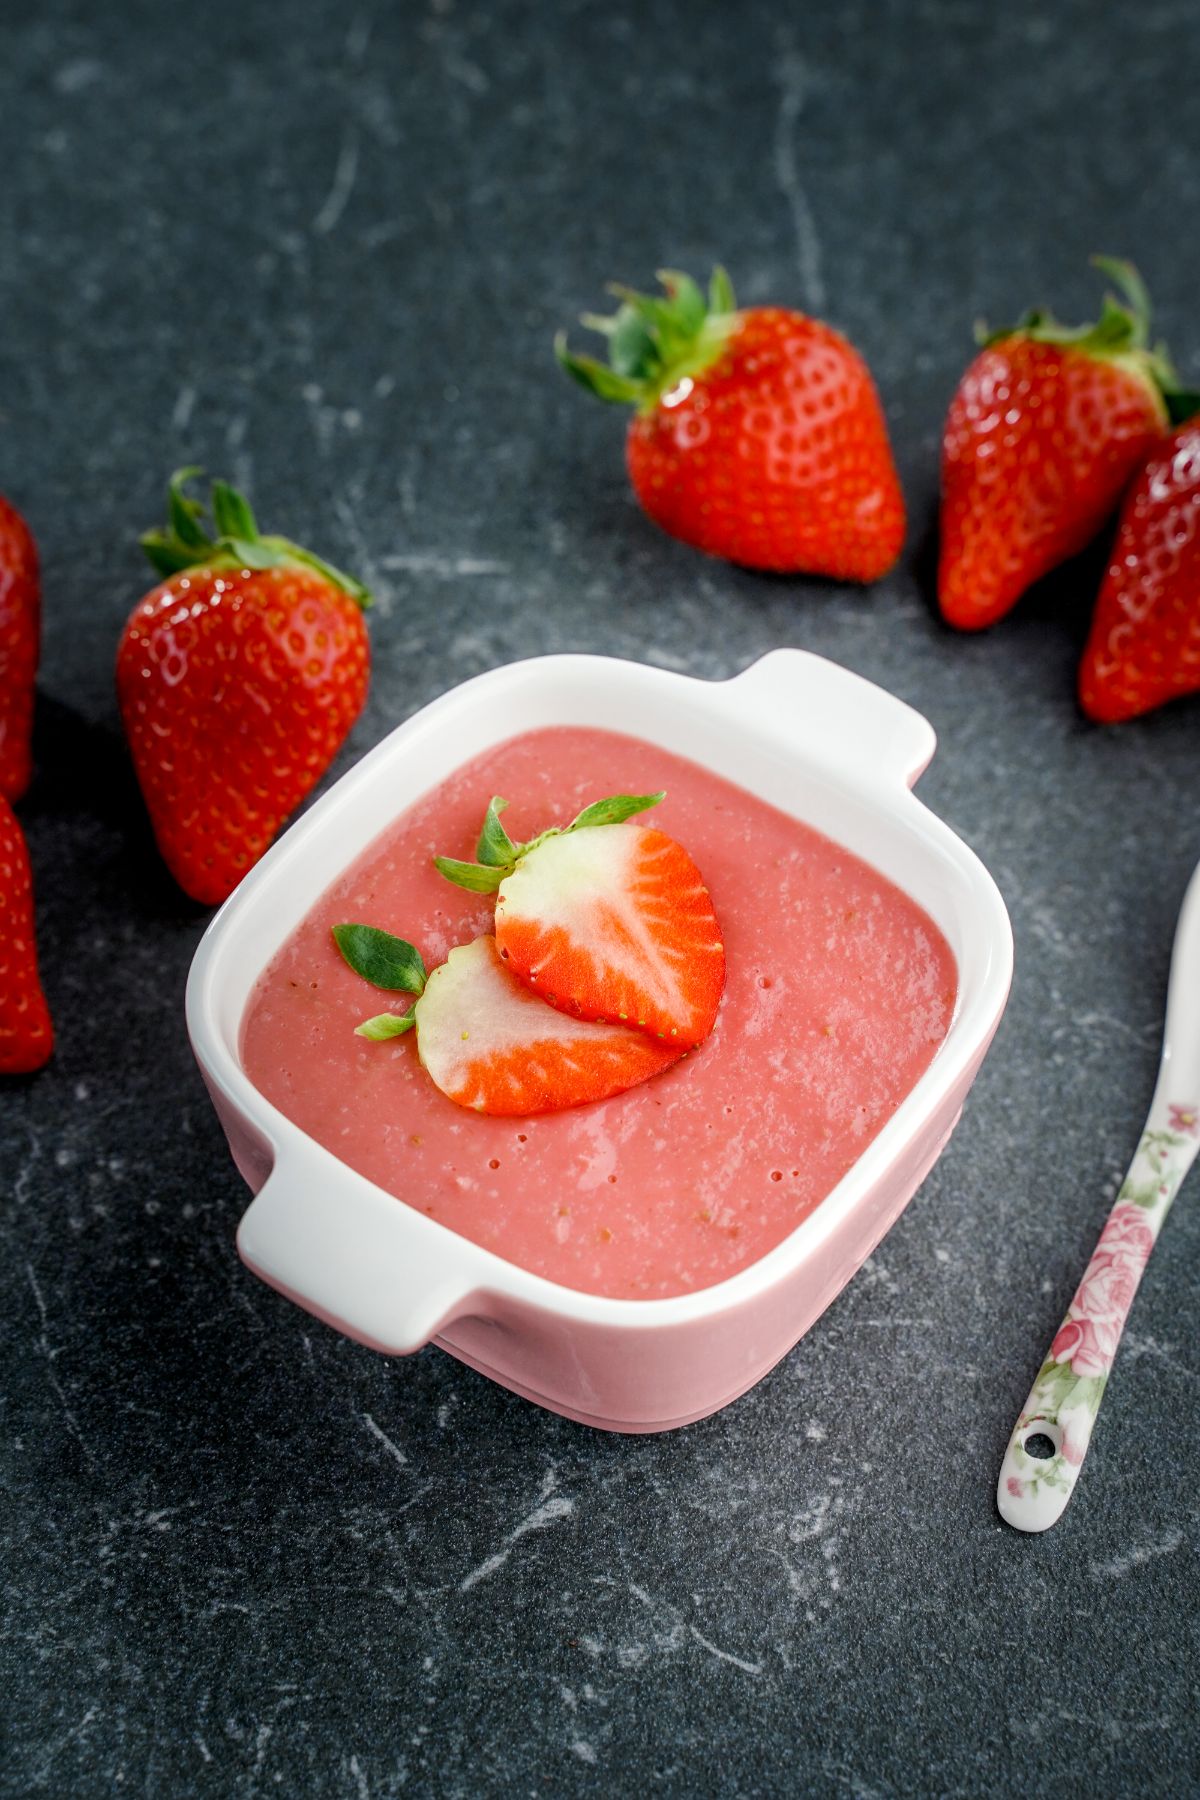 Bowl of homemade strawberry pudding with sliced strawberries and with ripe strawberries around.